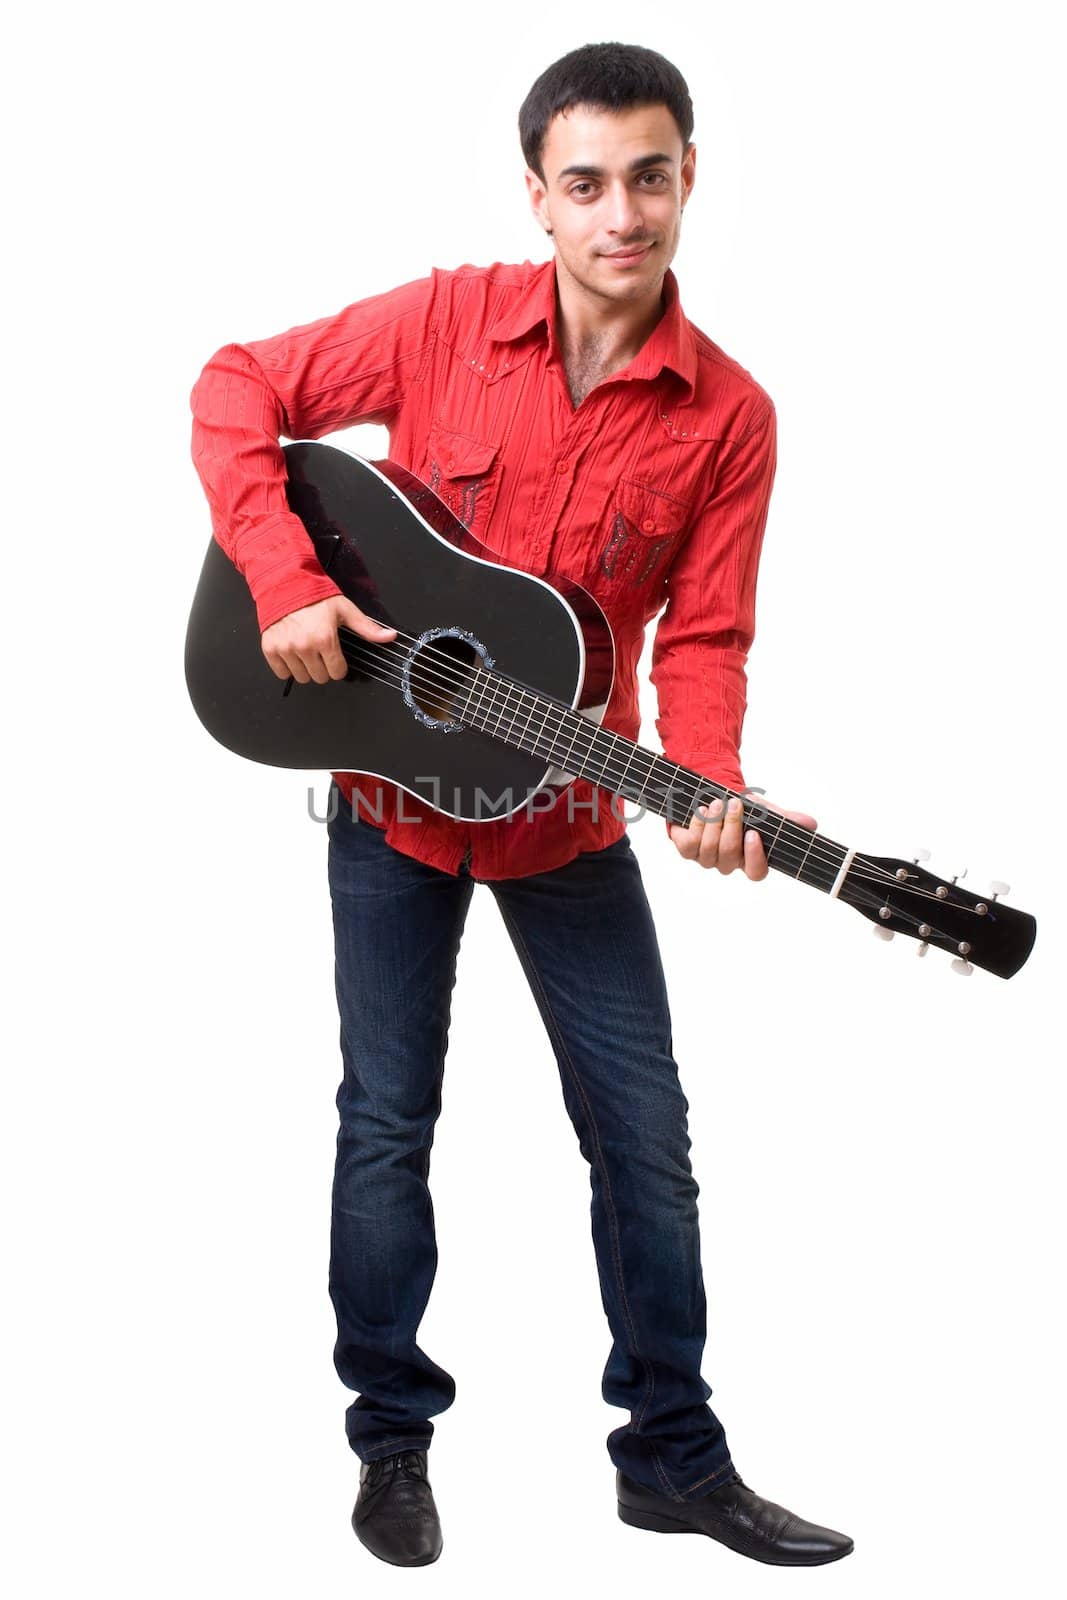 Guitarist. The man in a red shirt with a black guitar on a white background.